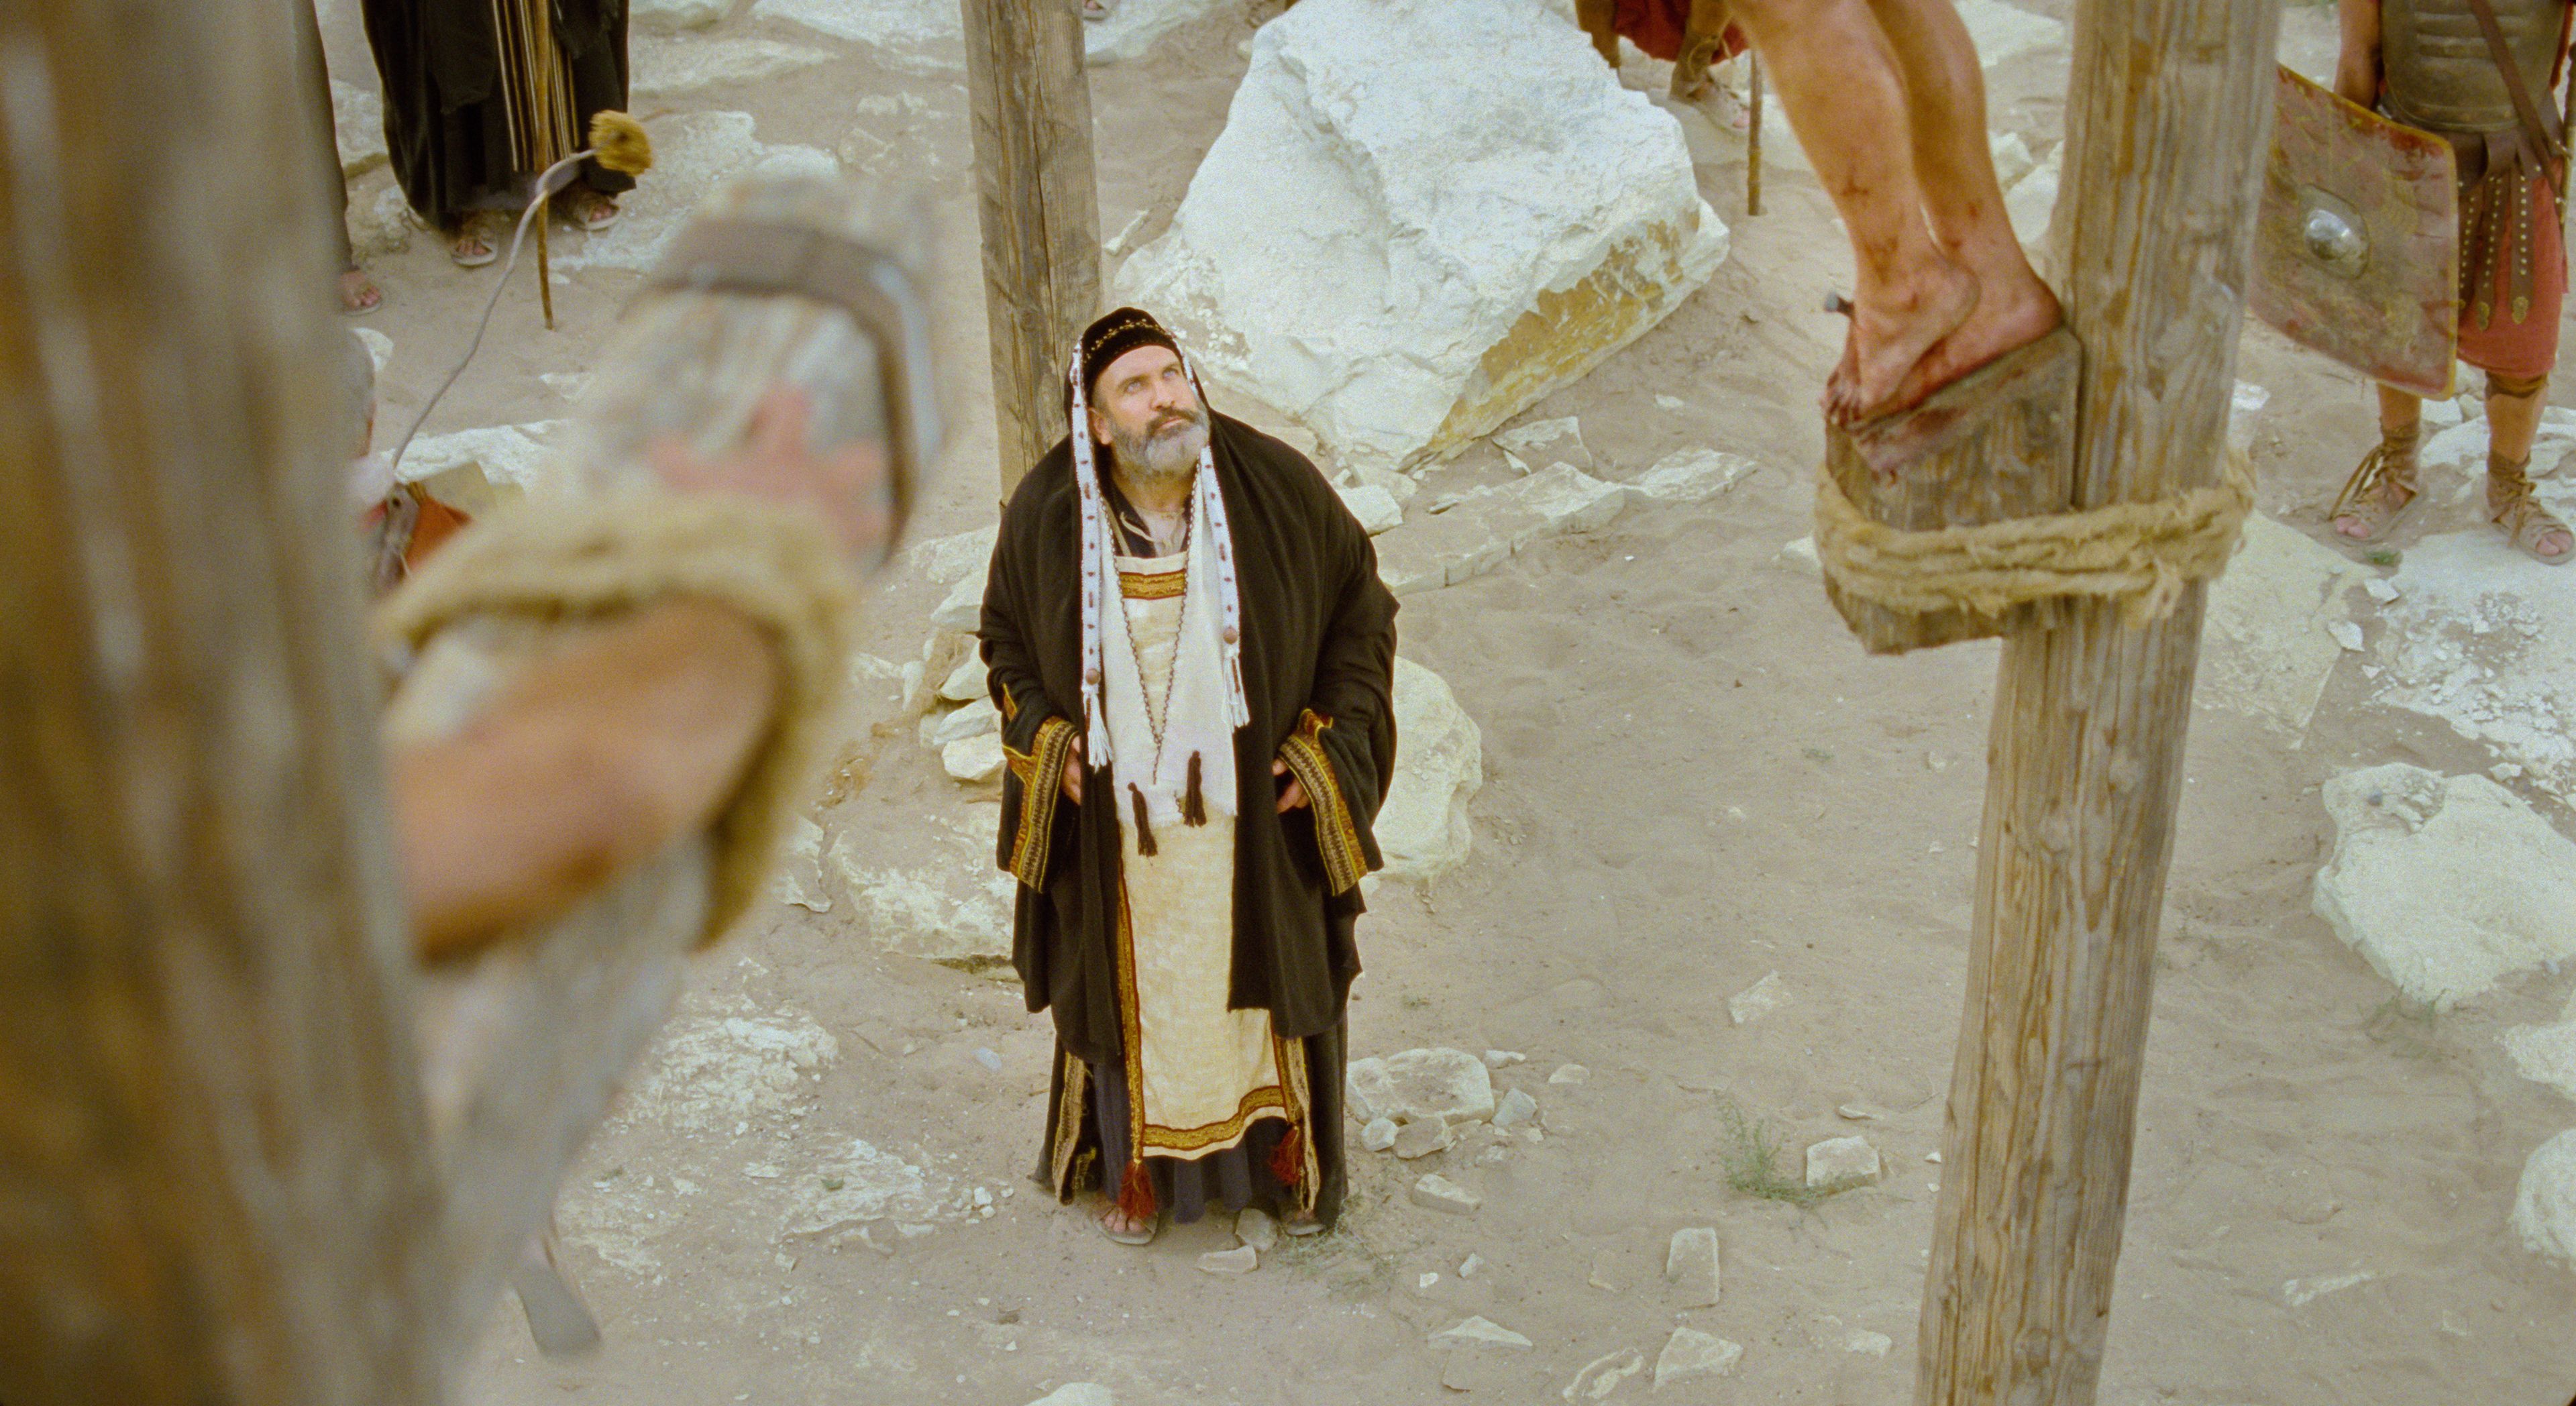 Caiaphas looks upon the Savior, who is hanging on the cross.